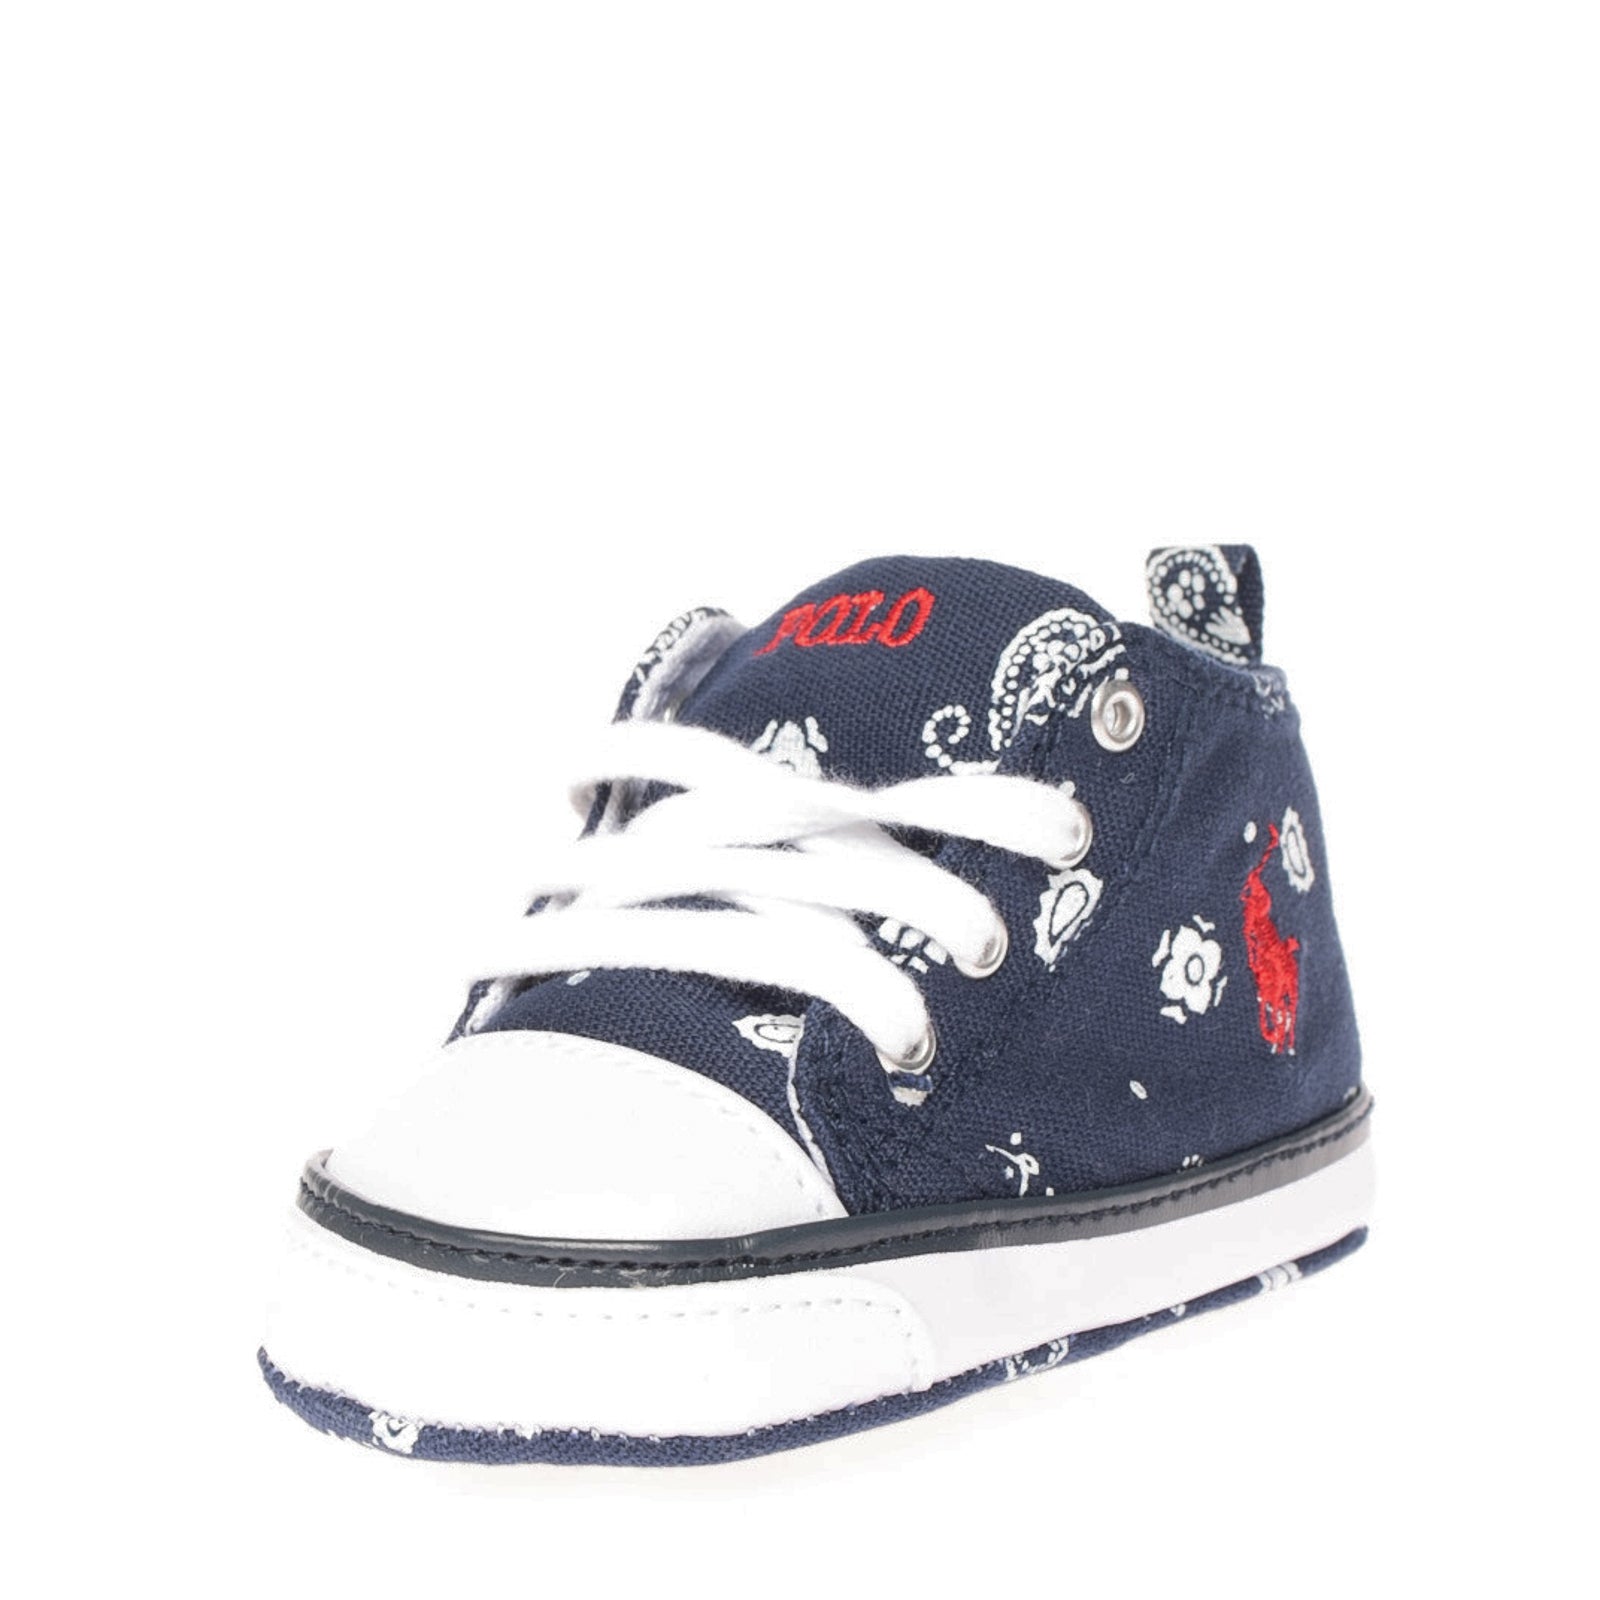 POLO RALPH LAUREN Baby Canvas Sneakers Size 16 UK 0.5 US 1 Embroidered Lace Up gallery main photo